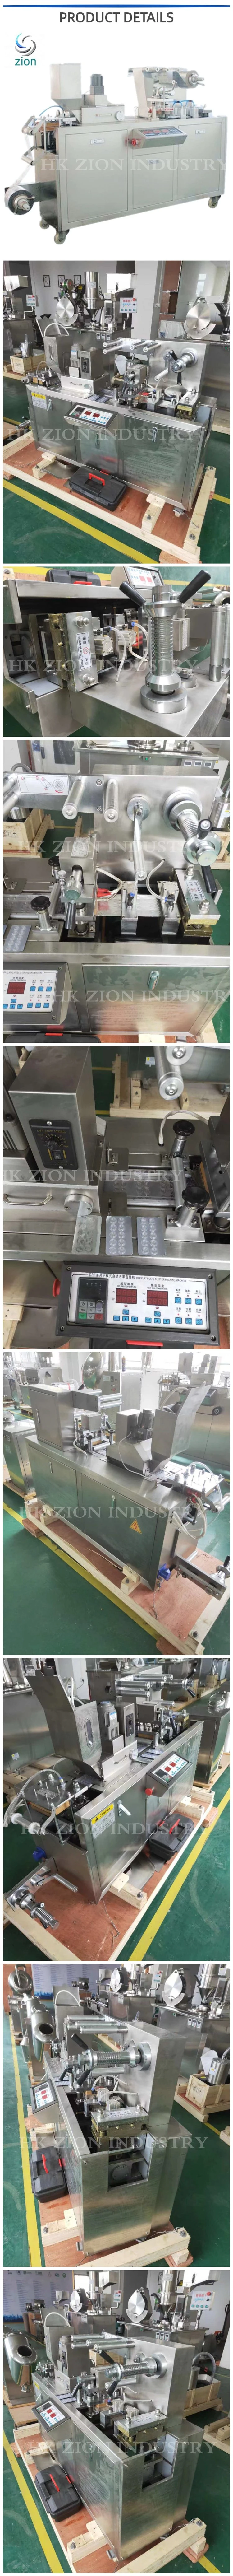 Aluminum-Plastic Forming Filling Blister Sealing Packing Machine Auto PVC Tablet Packing Machine Hot Sealing Chewables Tablets Blister Packaging Machine